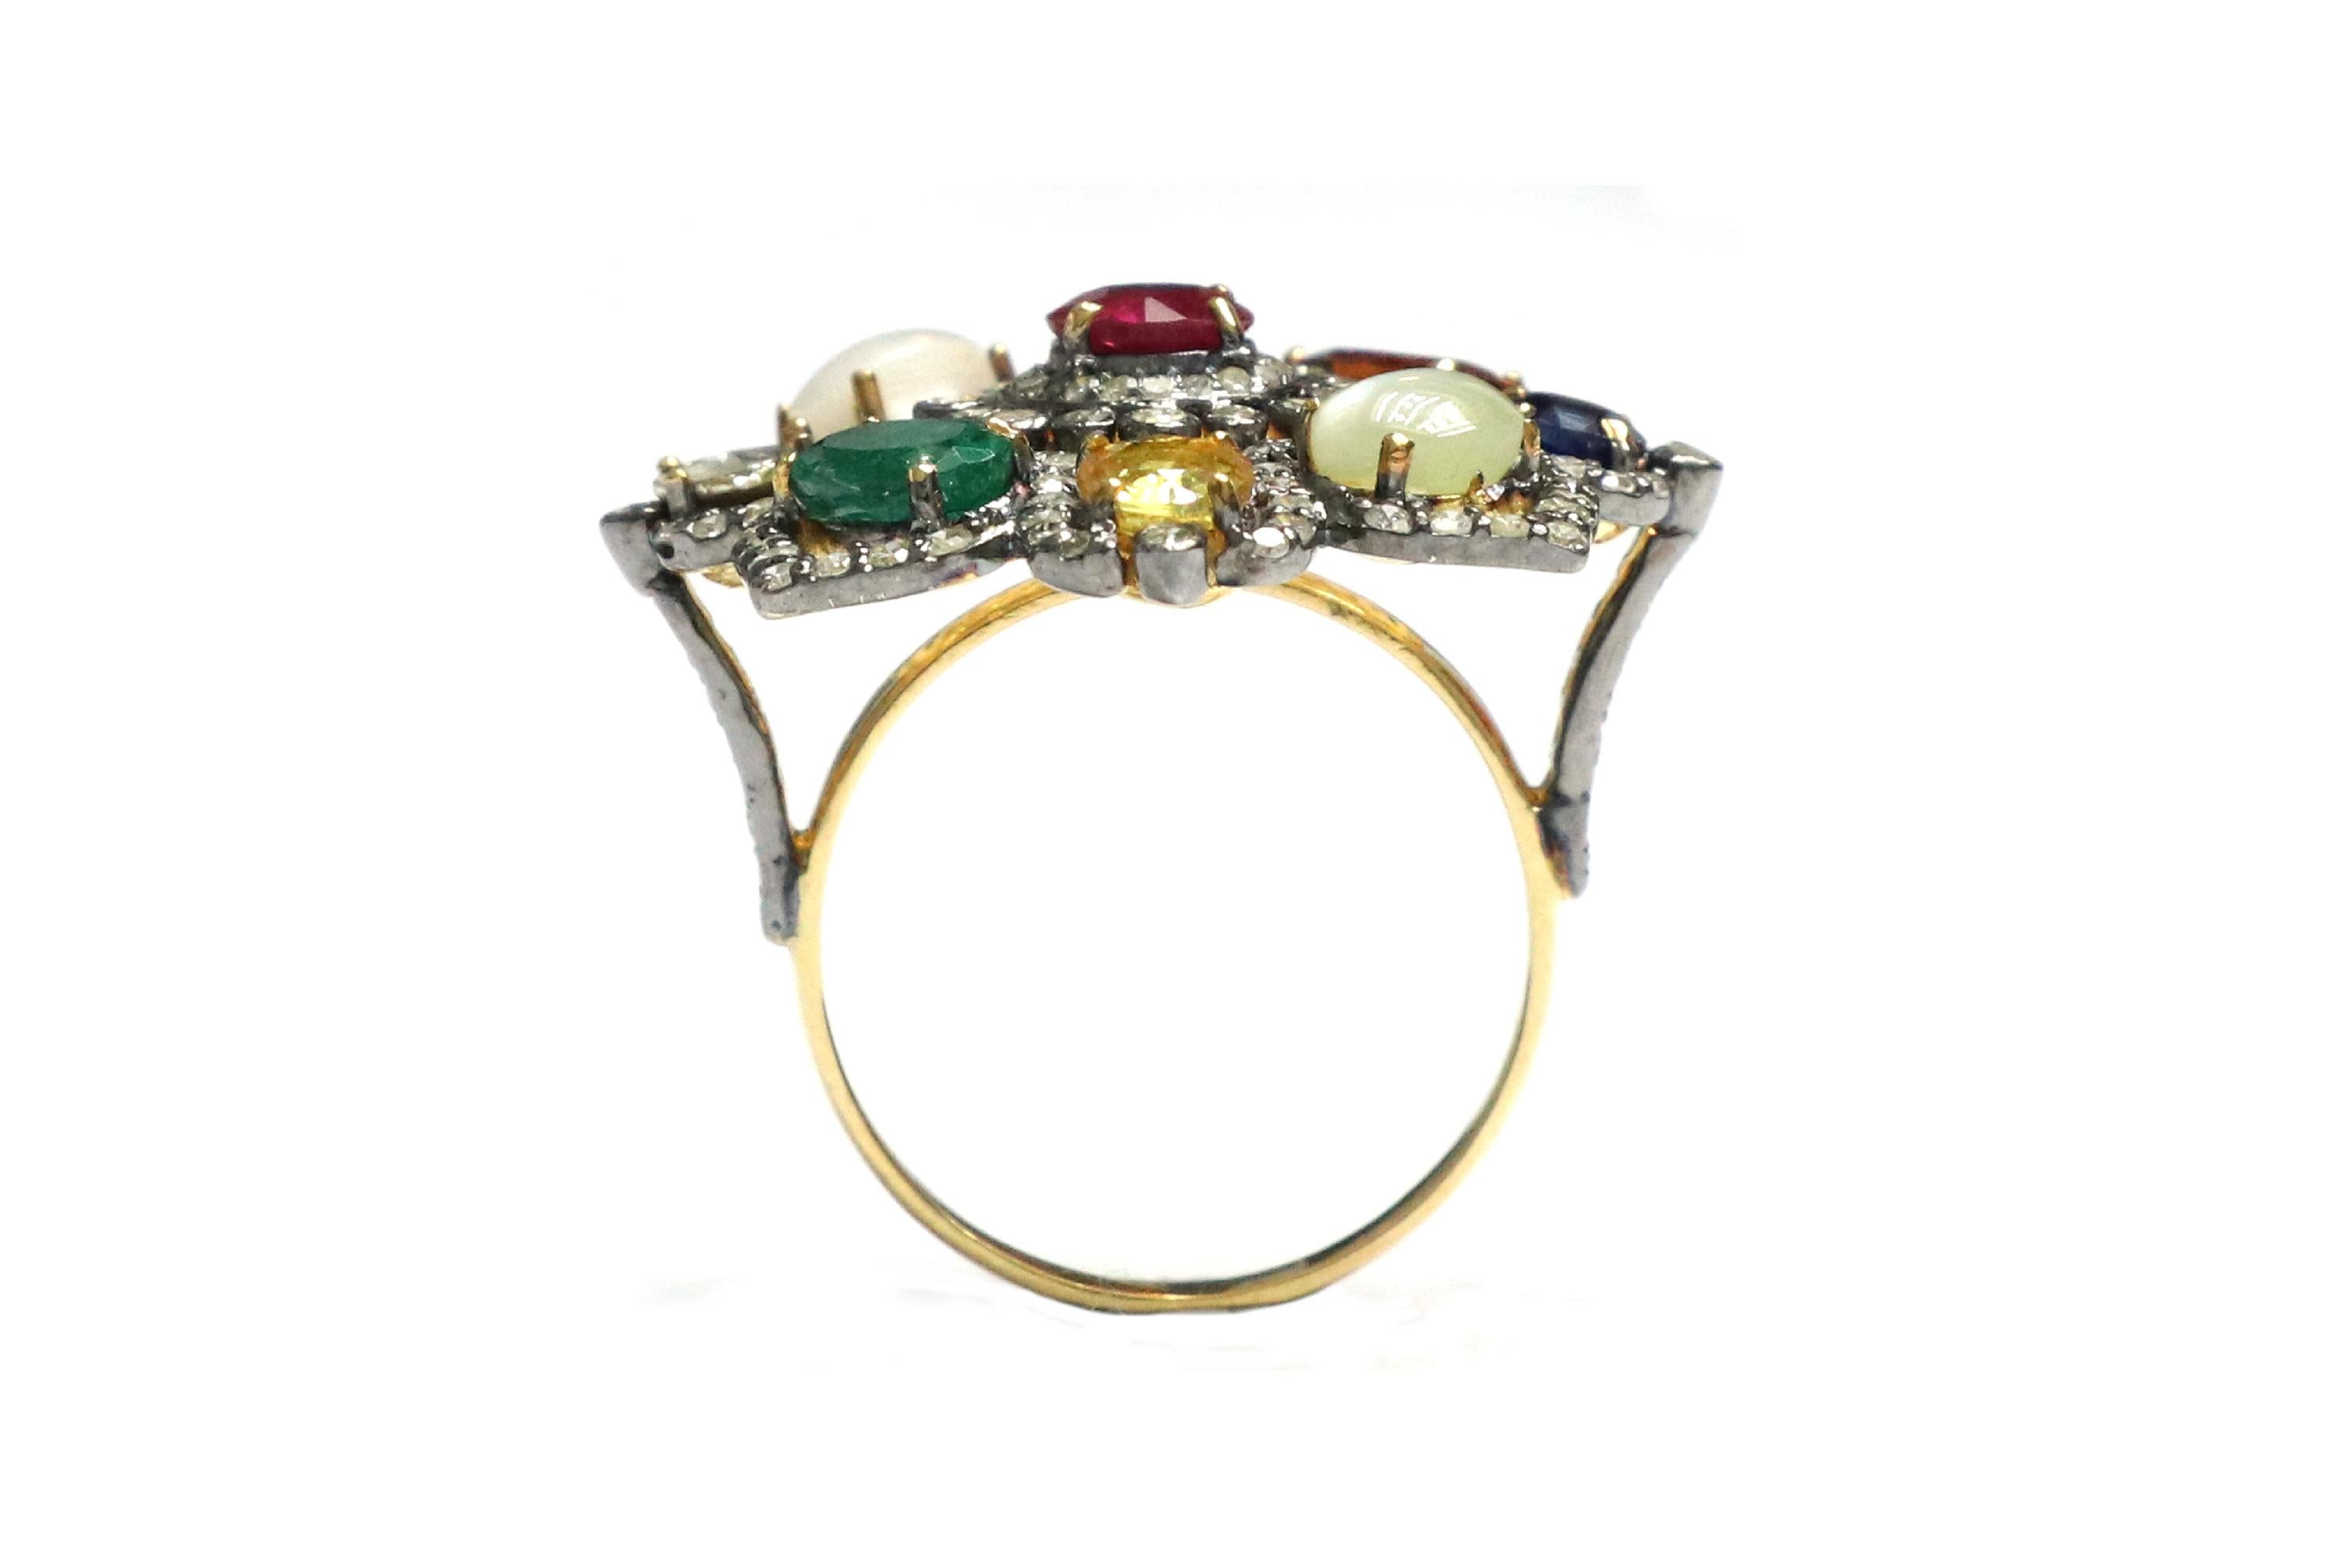 Nine Precious Gems Fashion Ring in Art-Deco Style

This immaculate Victorian period style Navratan (nine) gems ring is mesmerizing. Navratnas of the nine gemstones represent the nine planets on which Indian astrology is based and wearing them